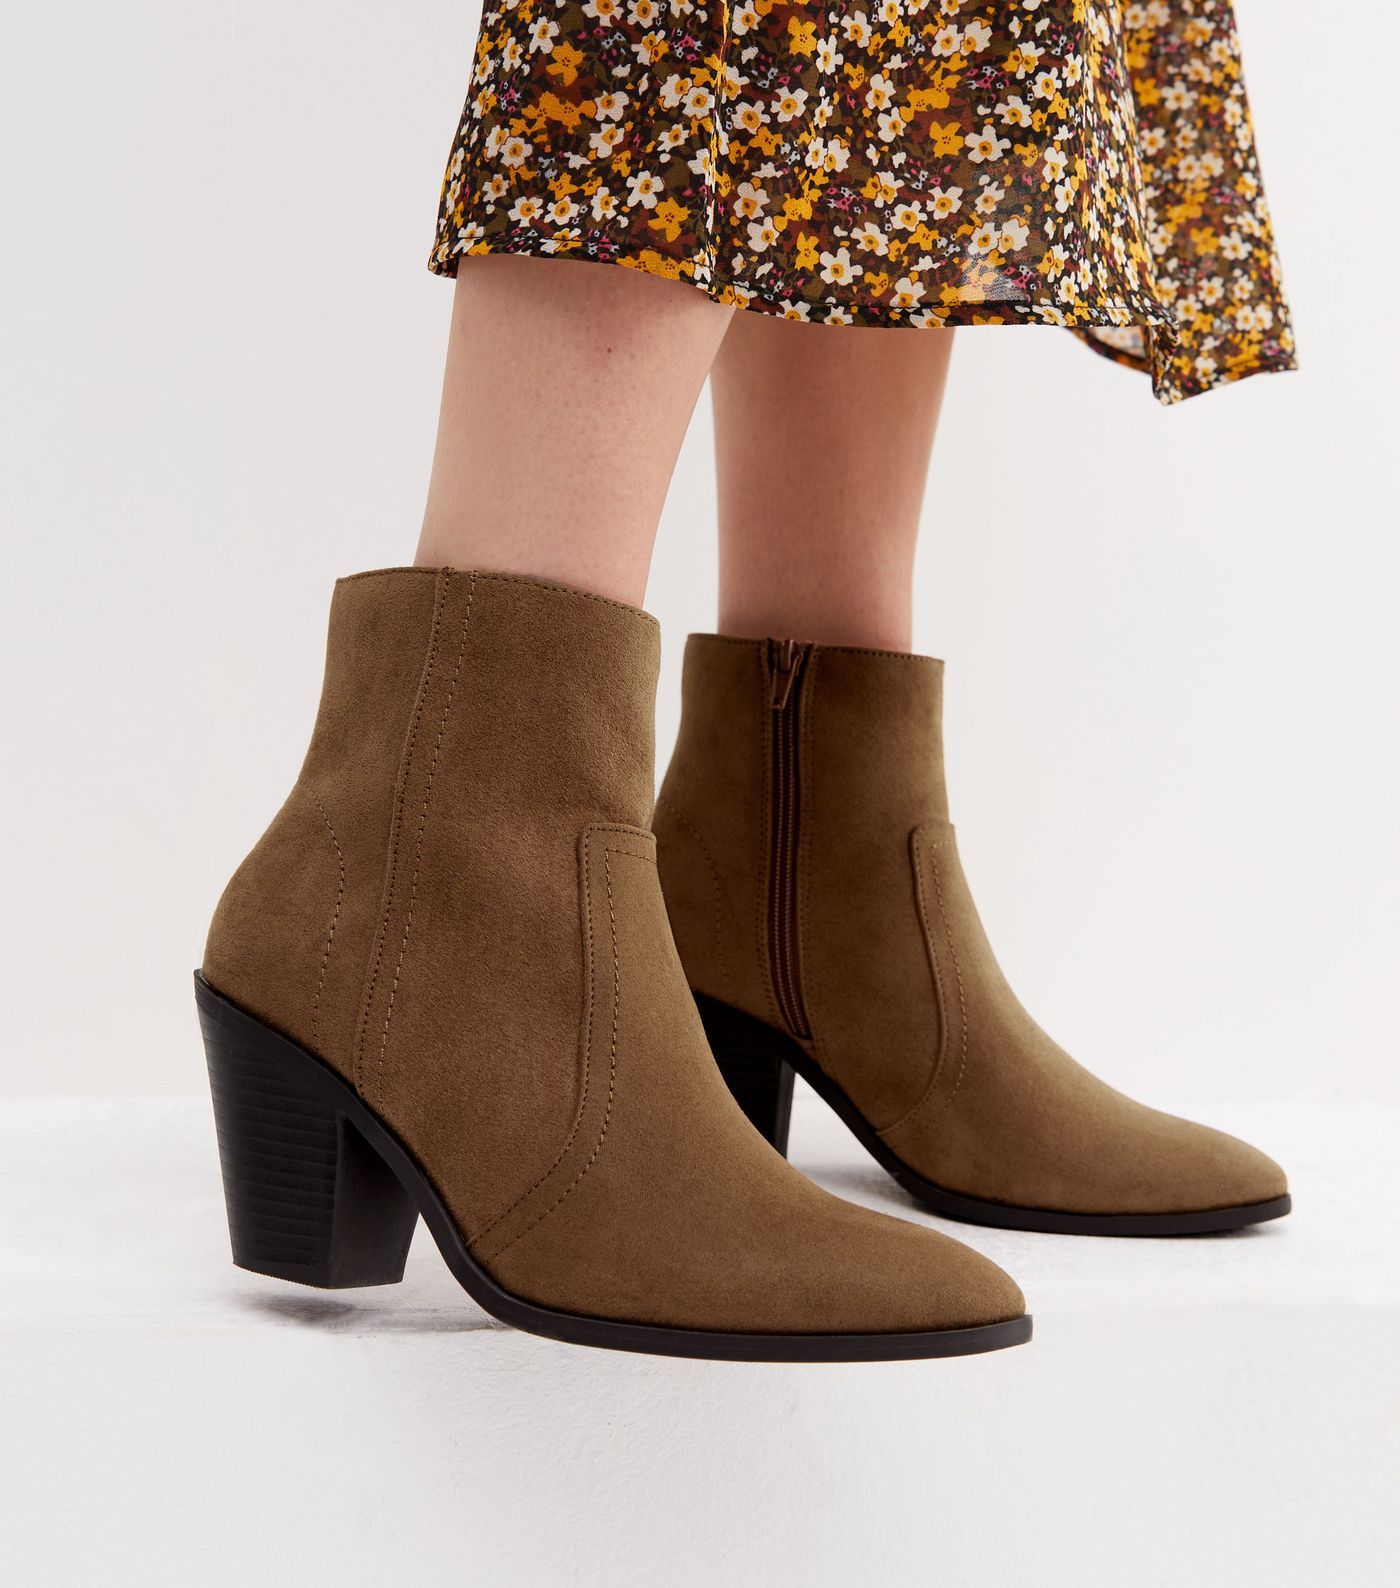 Tan Suedette Block Heel Western Boots
						
						Add to Saved Items
						Remove from Saved Ite... | New Look (UK)